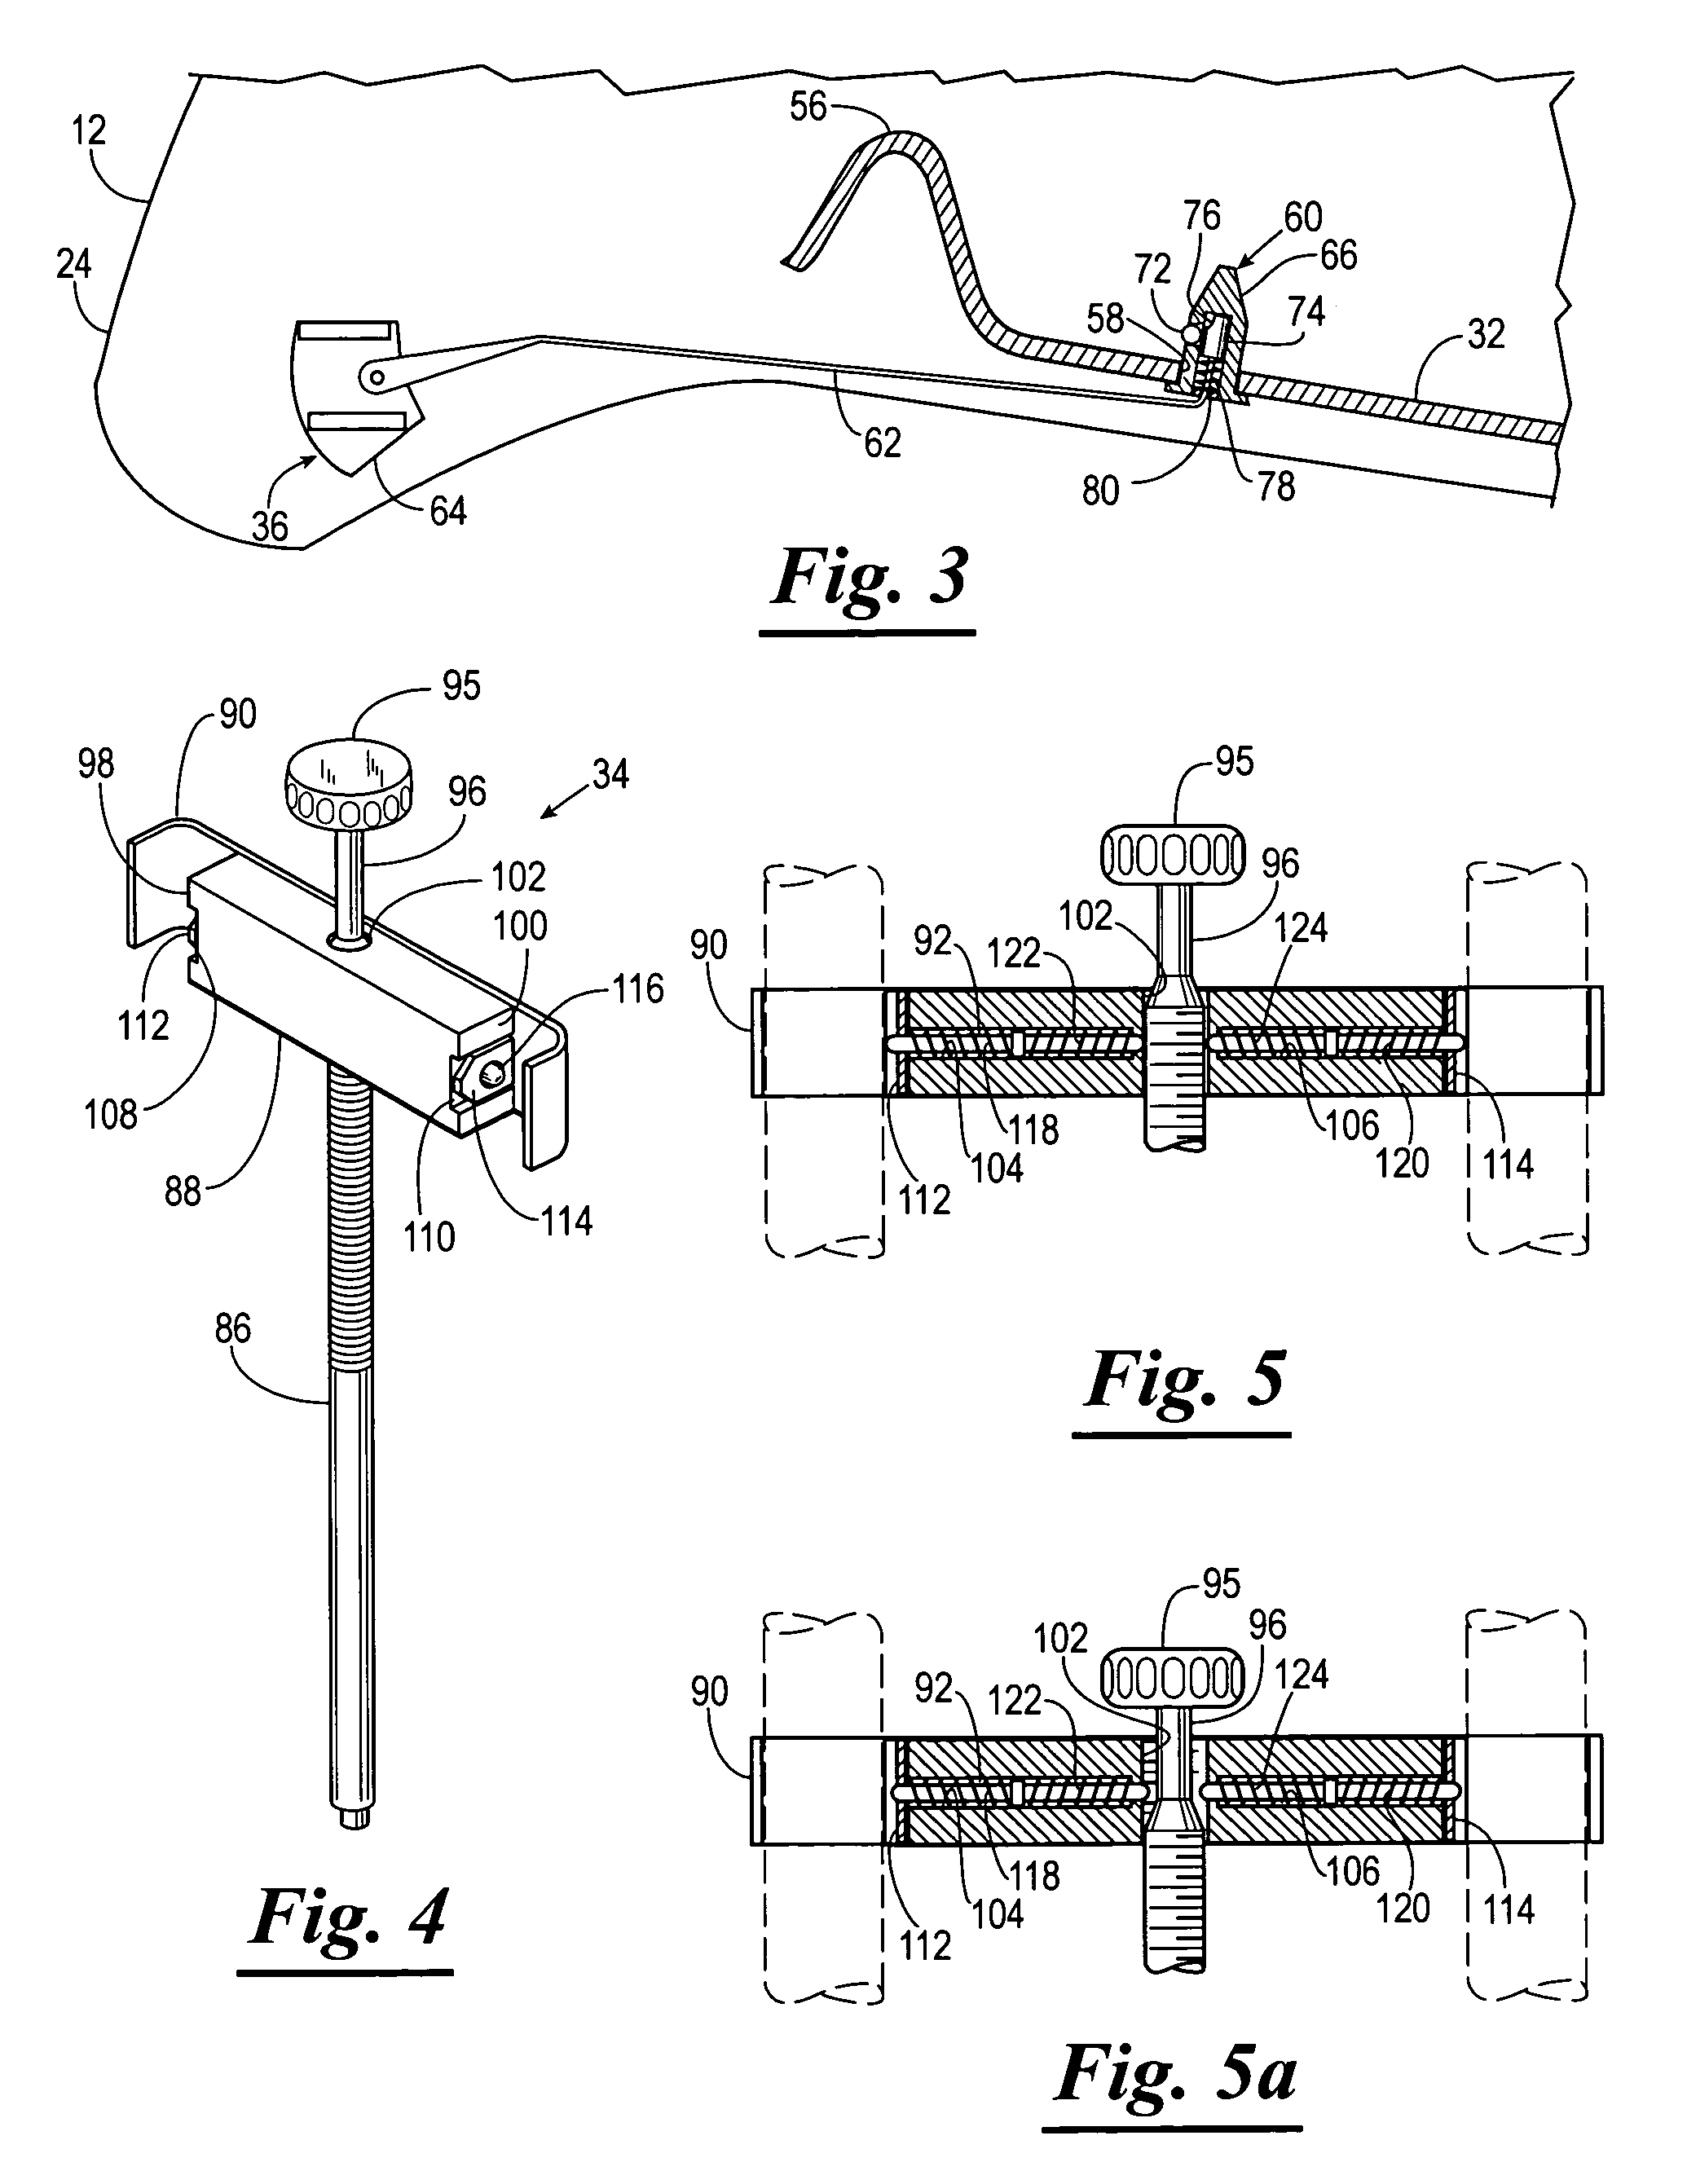 Child restraint apparatus for a vehicle